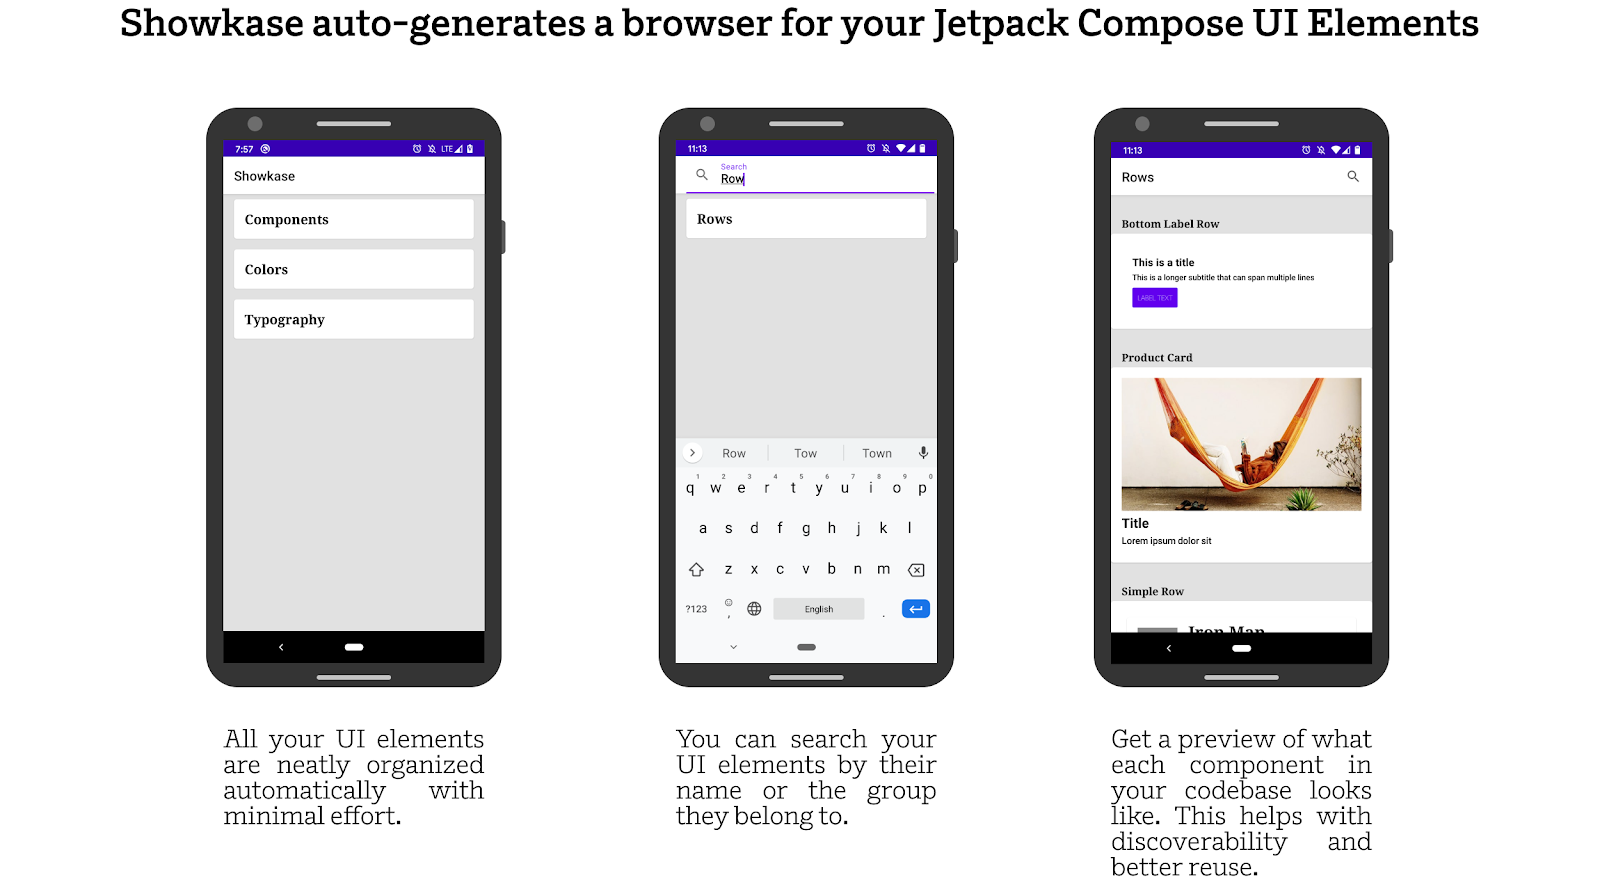 Showkase auto-generates a browser for your Jetpack Compose UI Elements